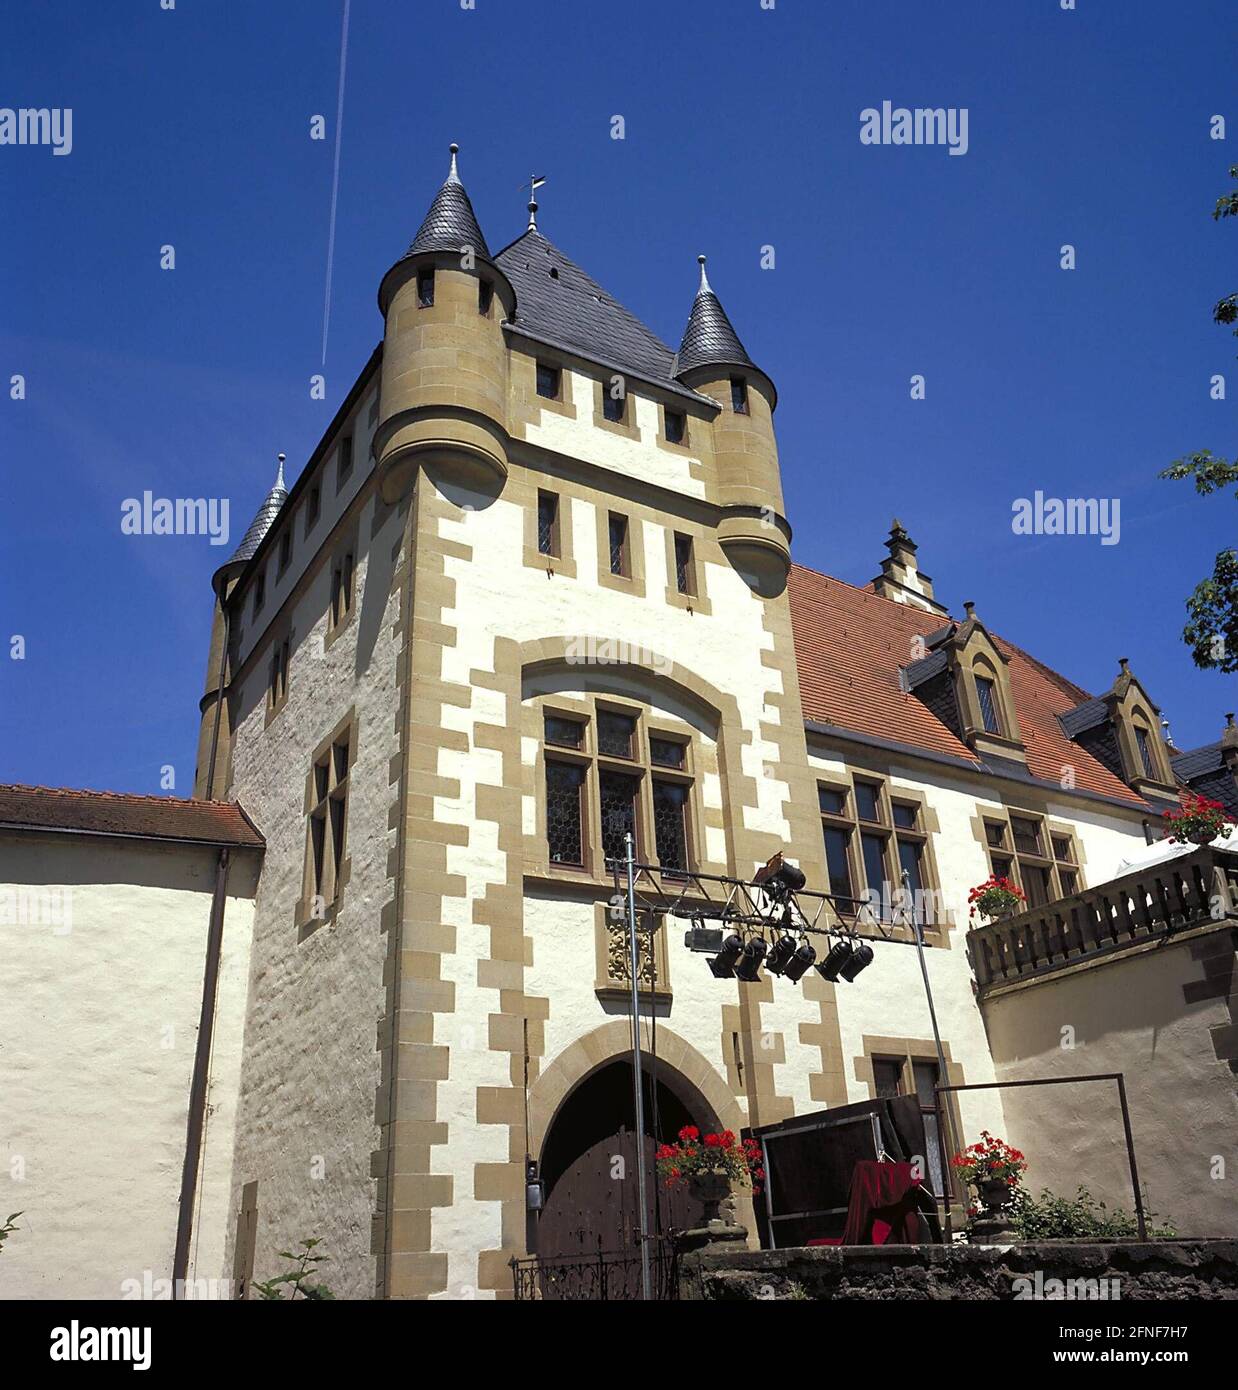 The ancestral castle of the knight Götz von Berlichingen, the core of which was built in the 15th and 16th centuries. [automated translation] Stock Photo